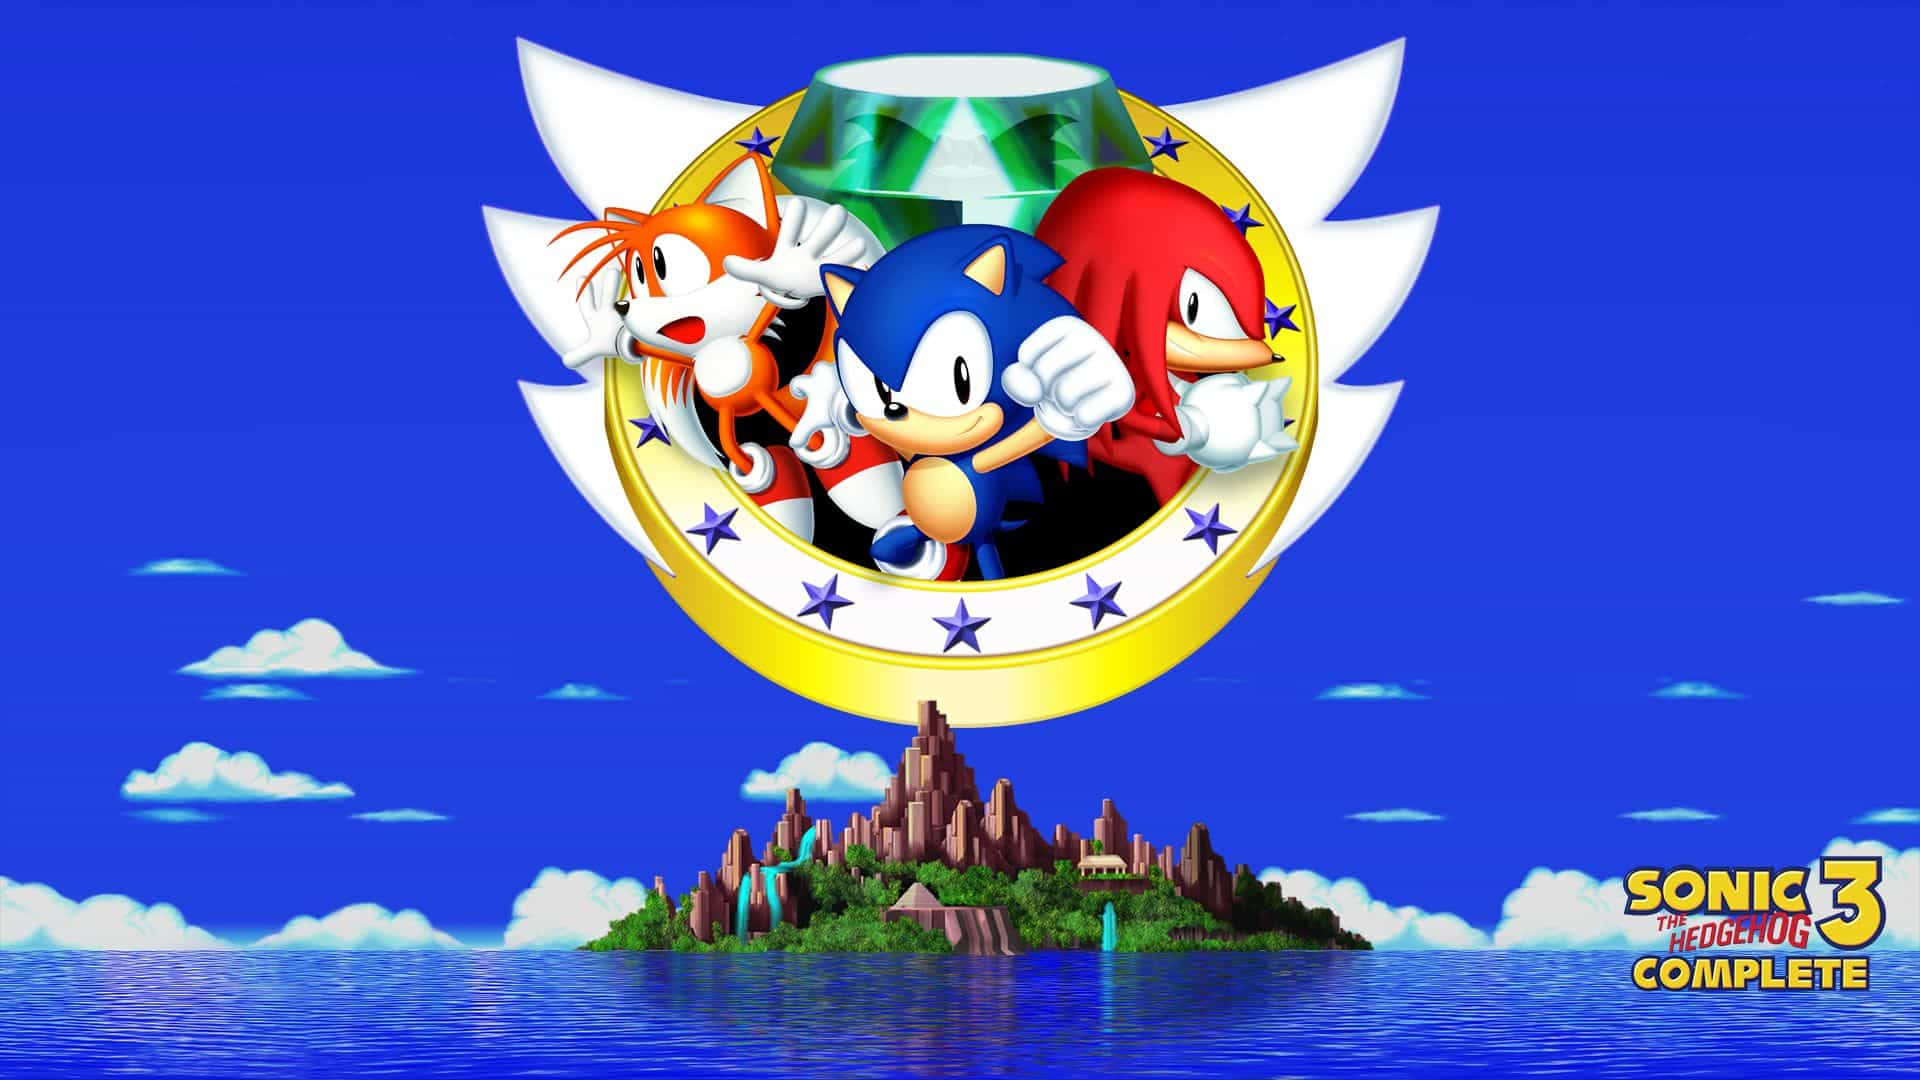 Sonic The Hedgehog 2 Wallpaper For PC by RayfiuxArt on DeviantArt